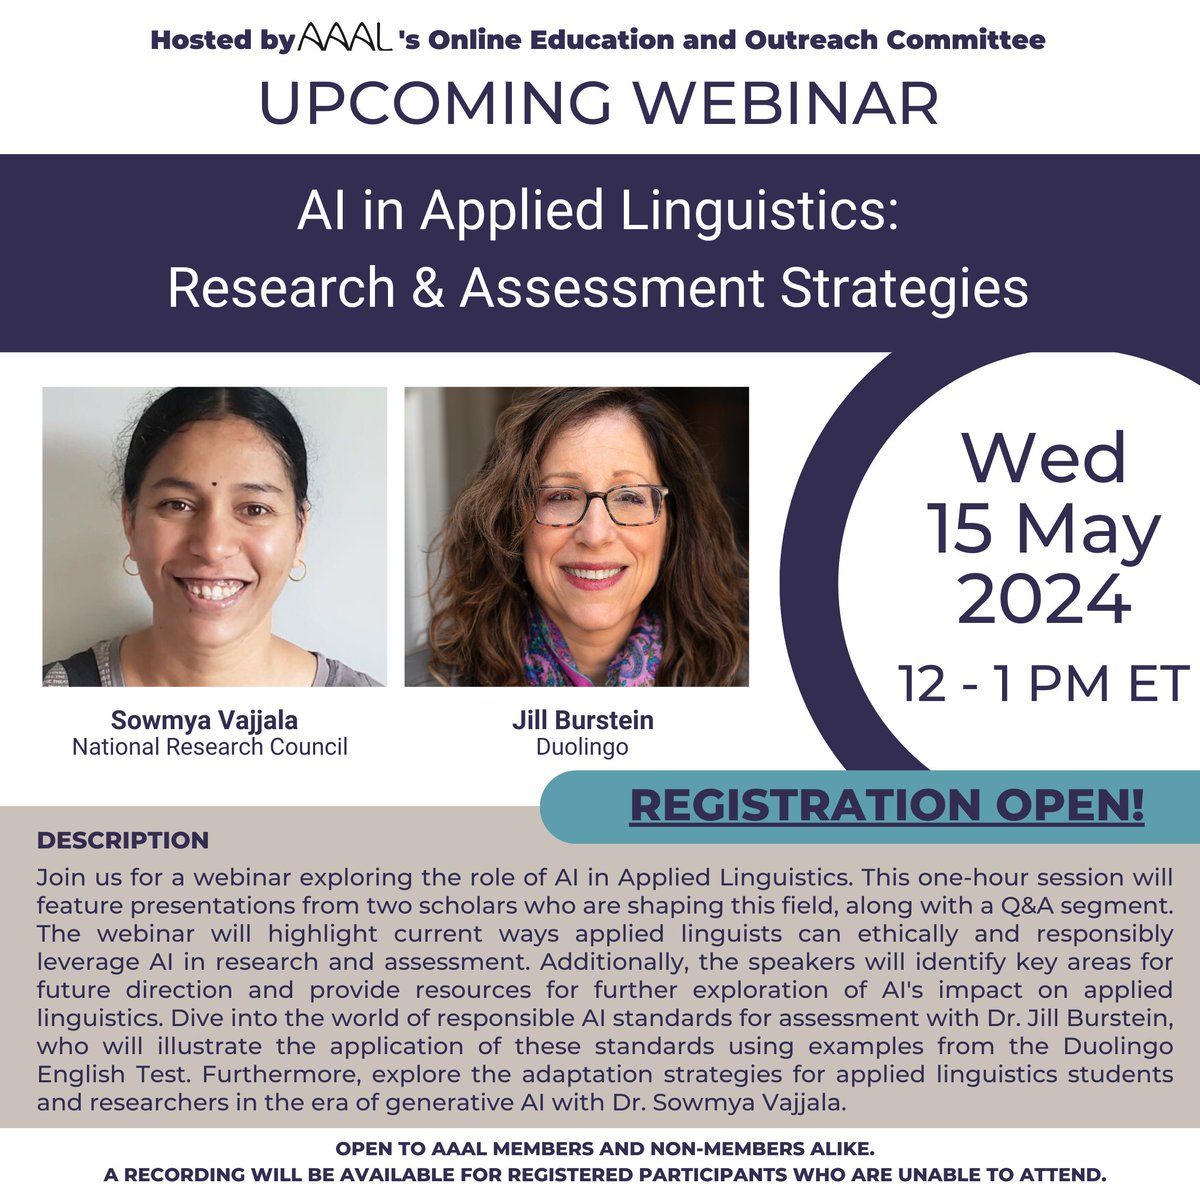 Join our webinar on 15 May 2024, 12-1 PM ET. Learn from Dr. Jill Burstein & Dr. Sowmya Vajjala about using AI responsibly in research and assessment. Gain insights on AI standards and strategies for linguistics. Register now: ow.ly/7WIA50RvR6S